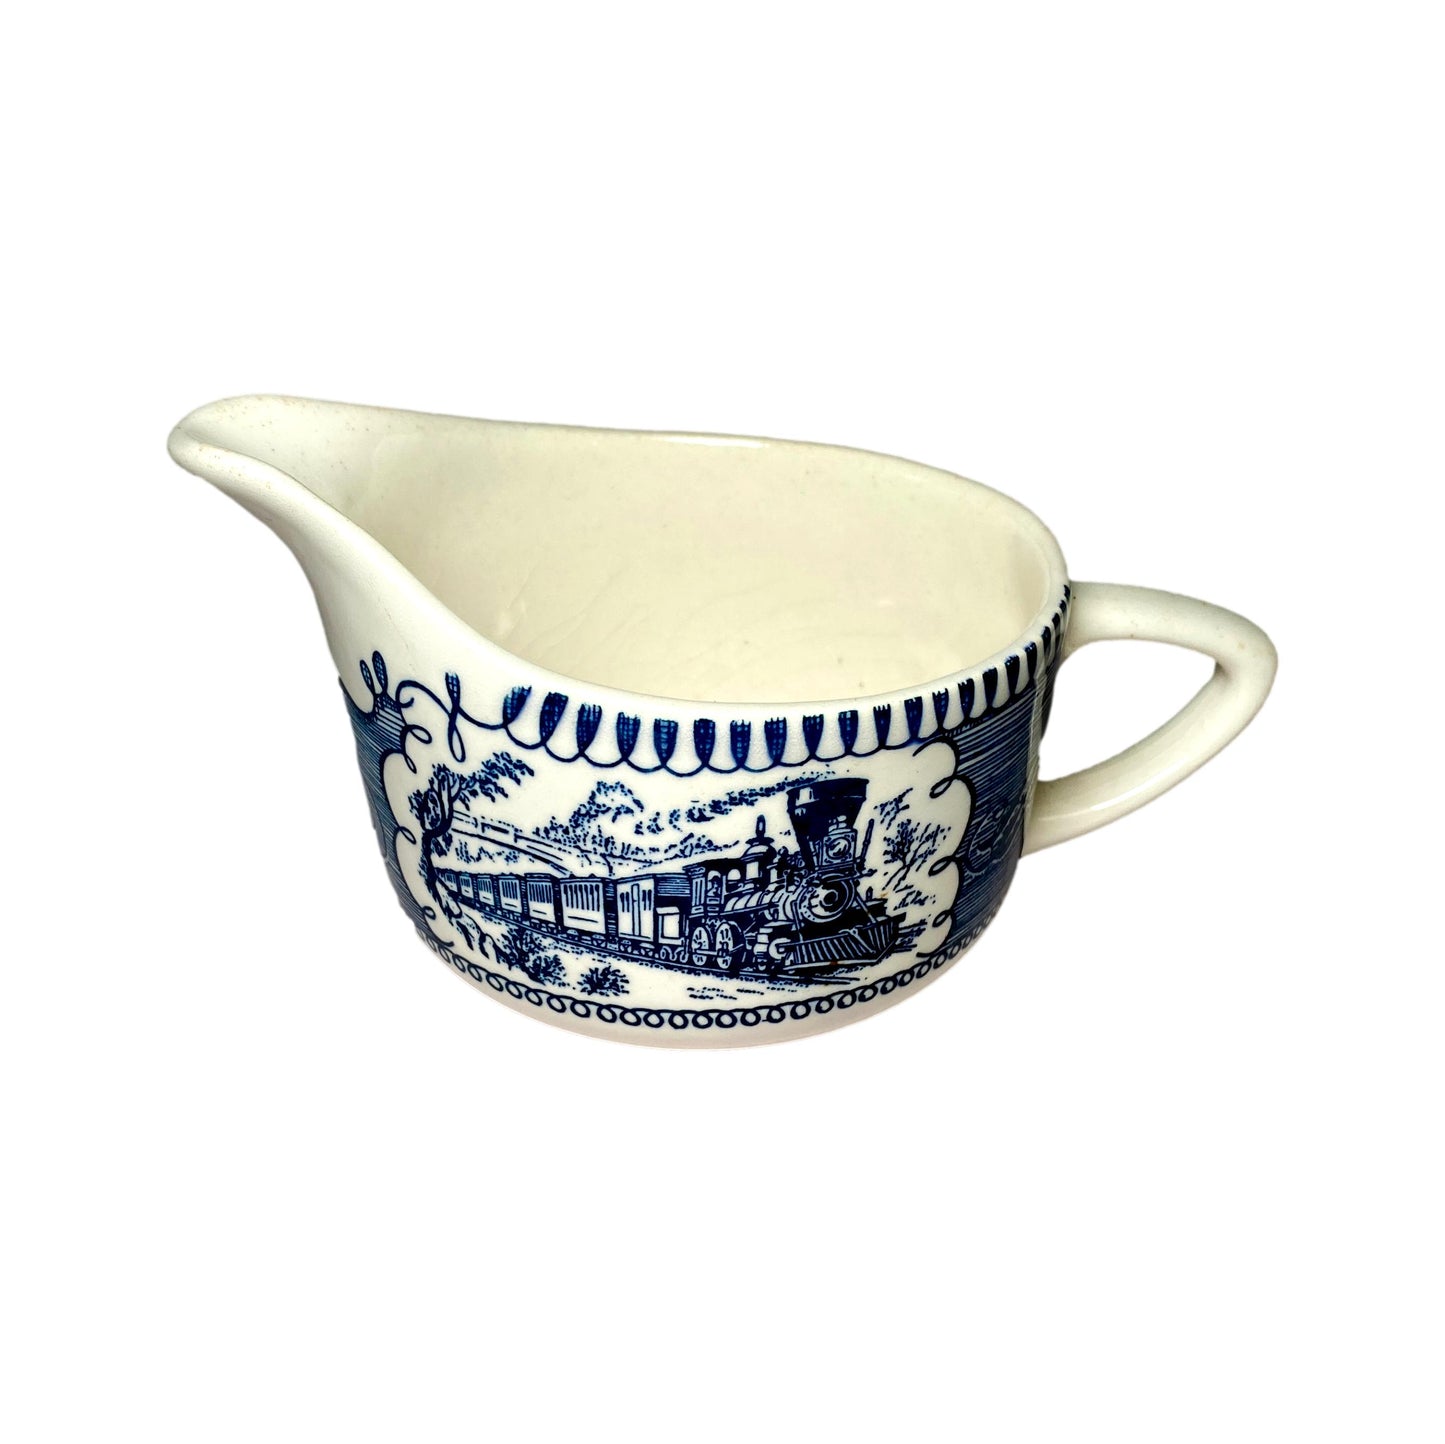 Currier & Ives Gravy Boat with Under Plate